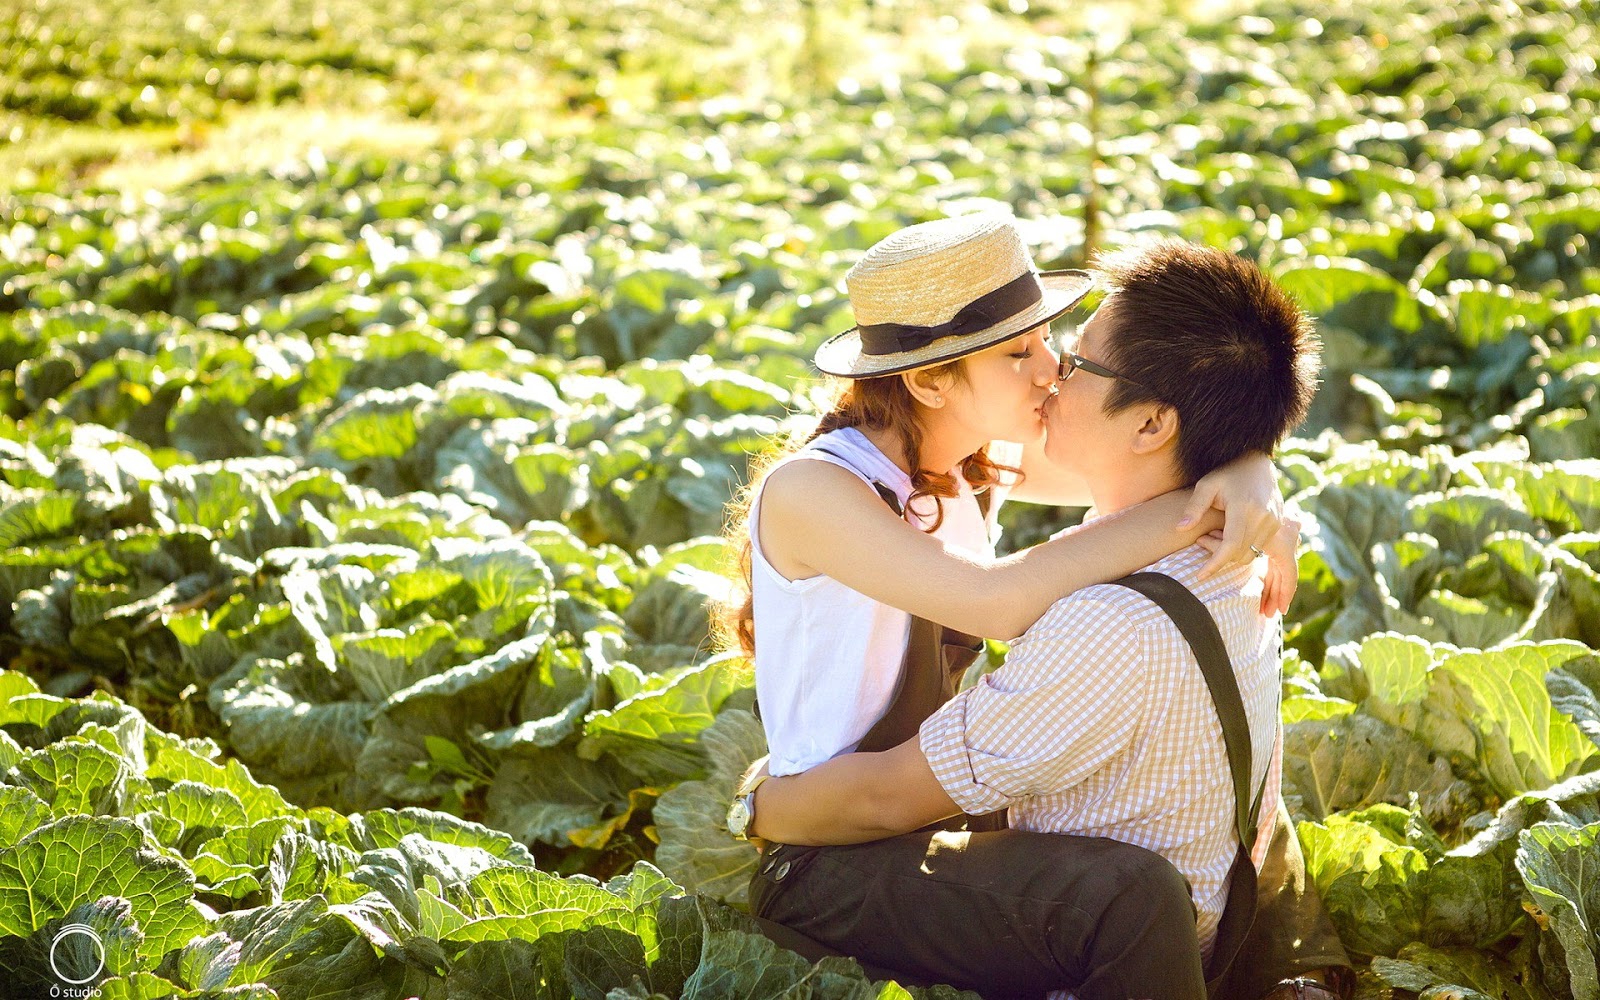 kiss wallpaper full hd,people in nature,botany,crop,plant,plantation